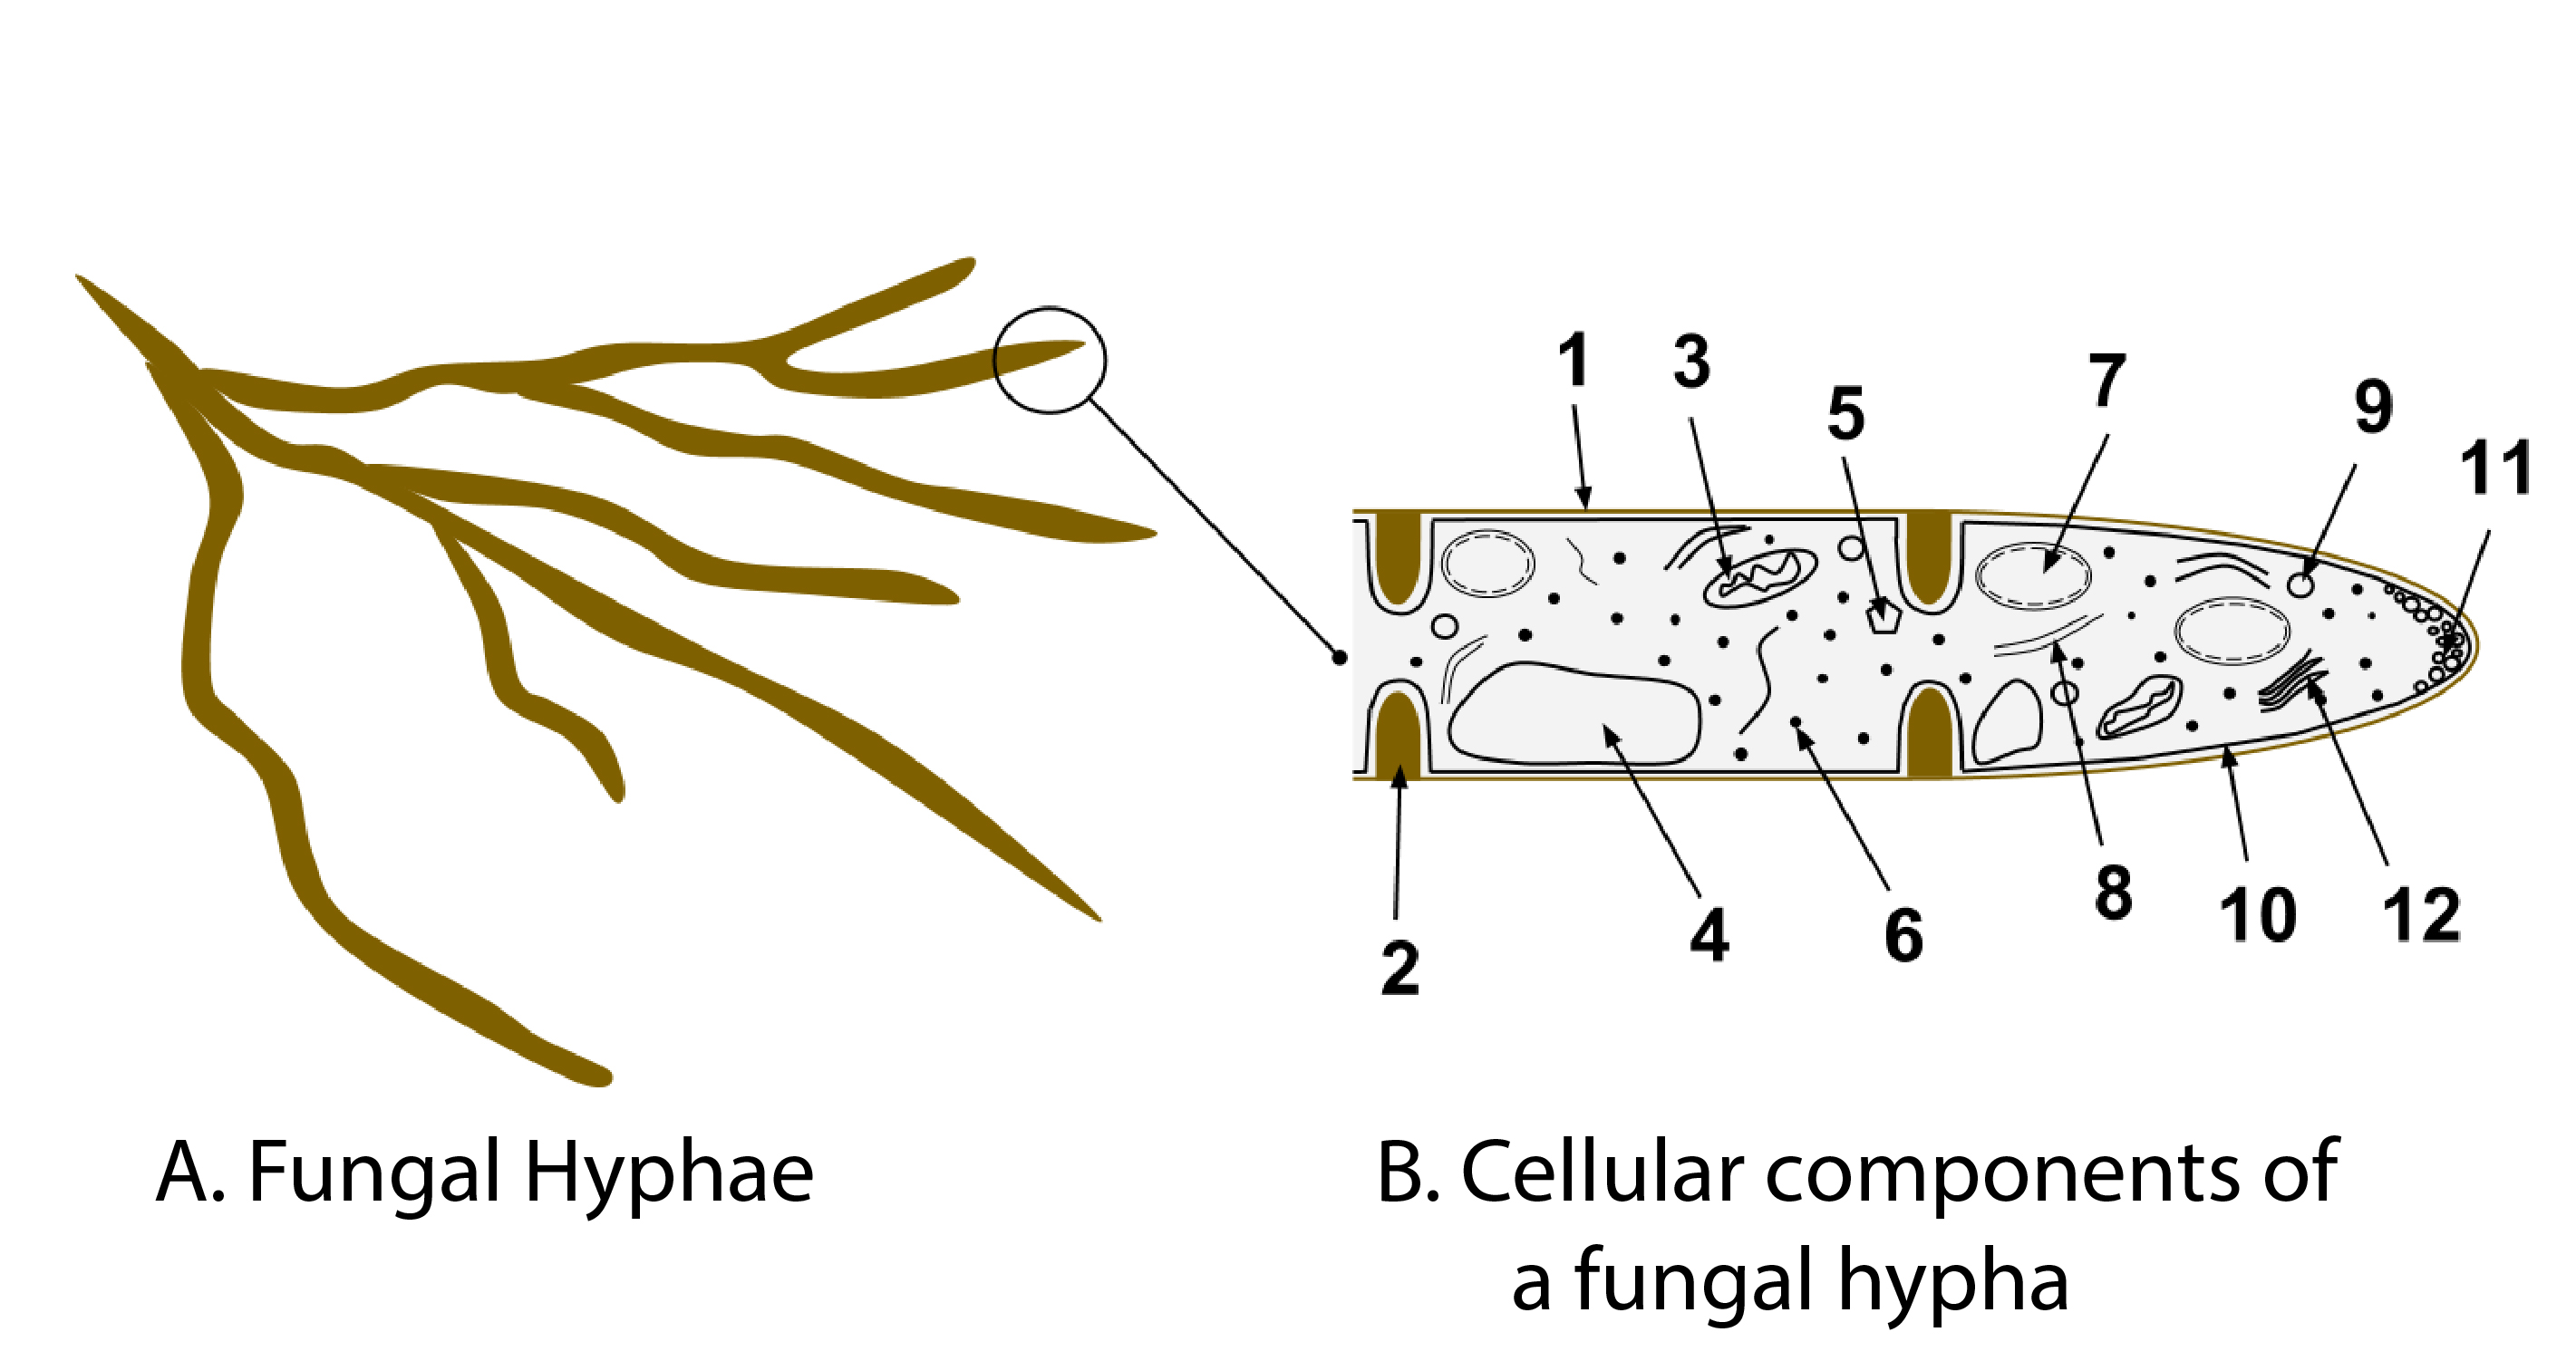 Macroscopic and microscopic views of a fungal hyphae